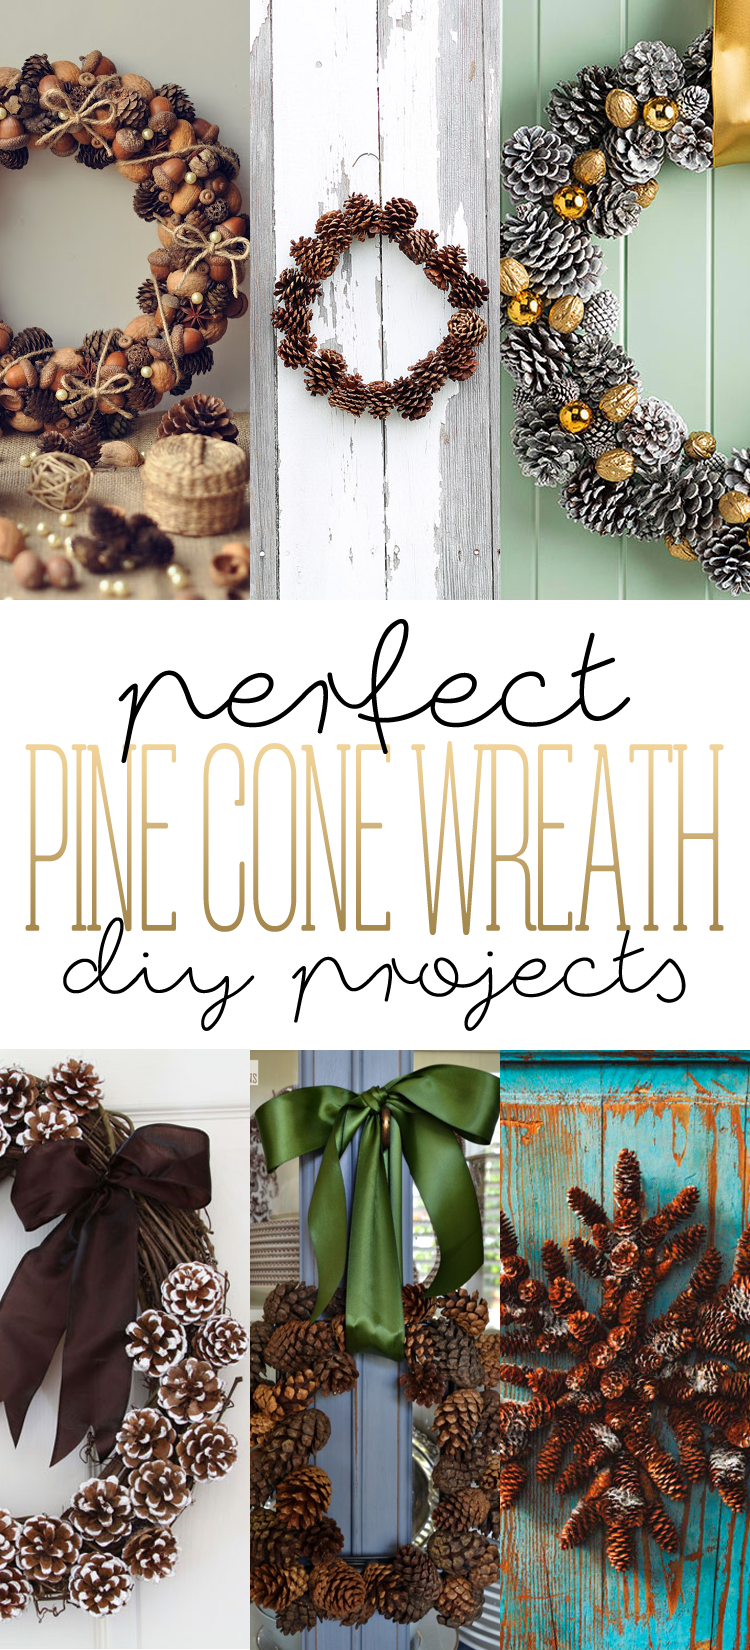 http://thecottagemarket.com/wp-content/uploads/2015/10/PineCone-tower-001.png